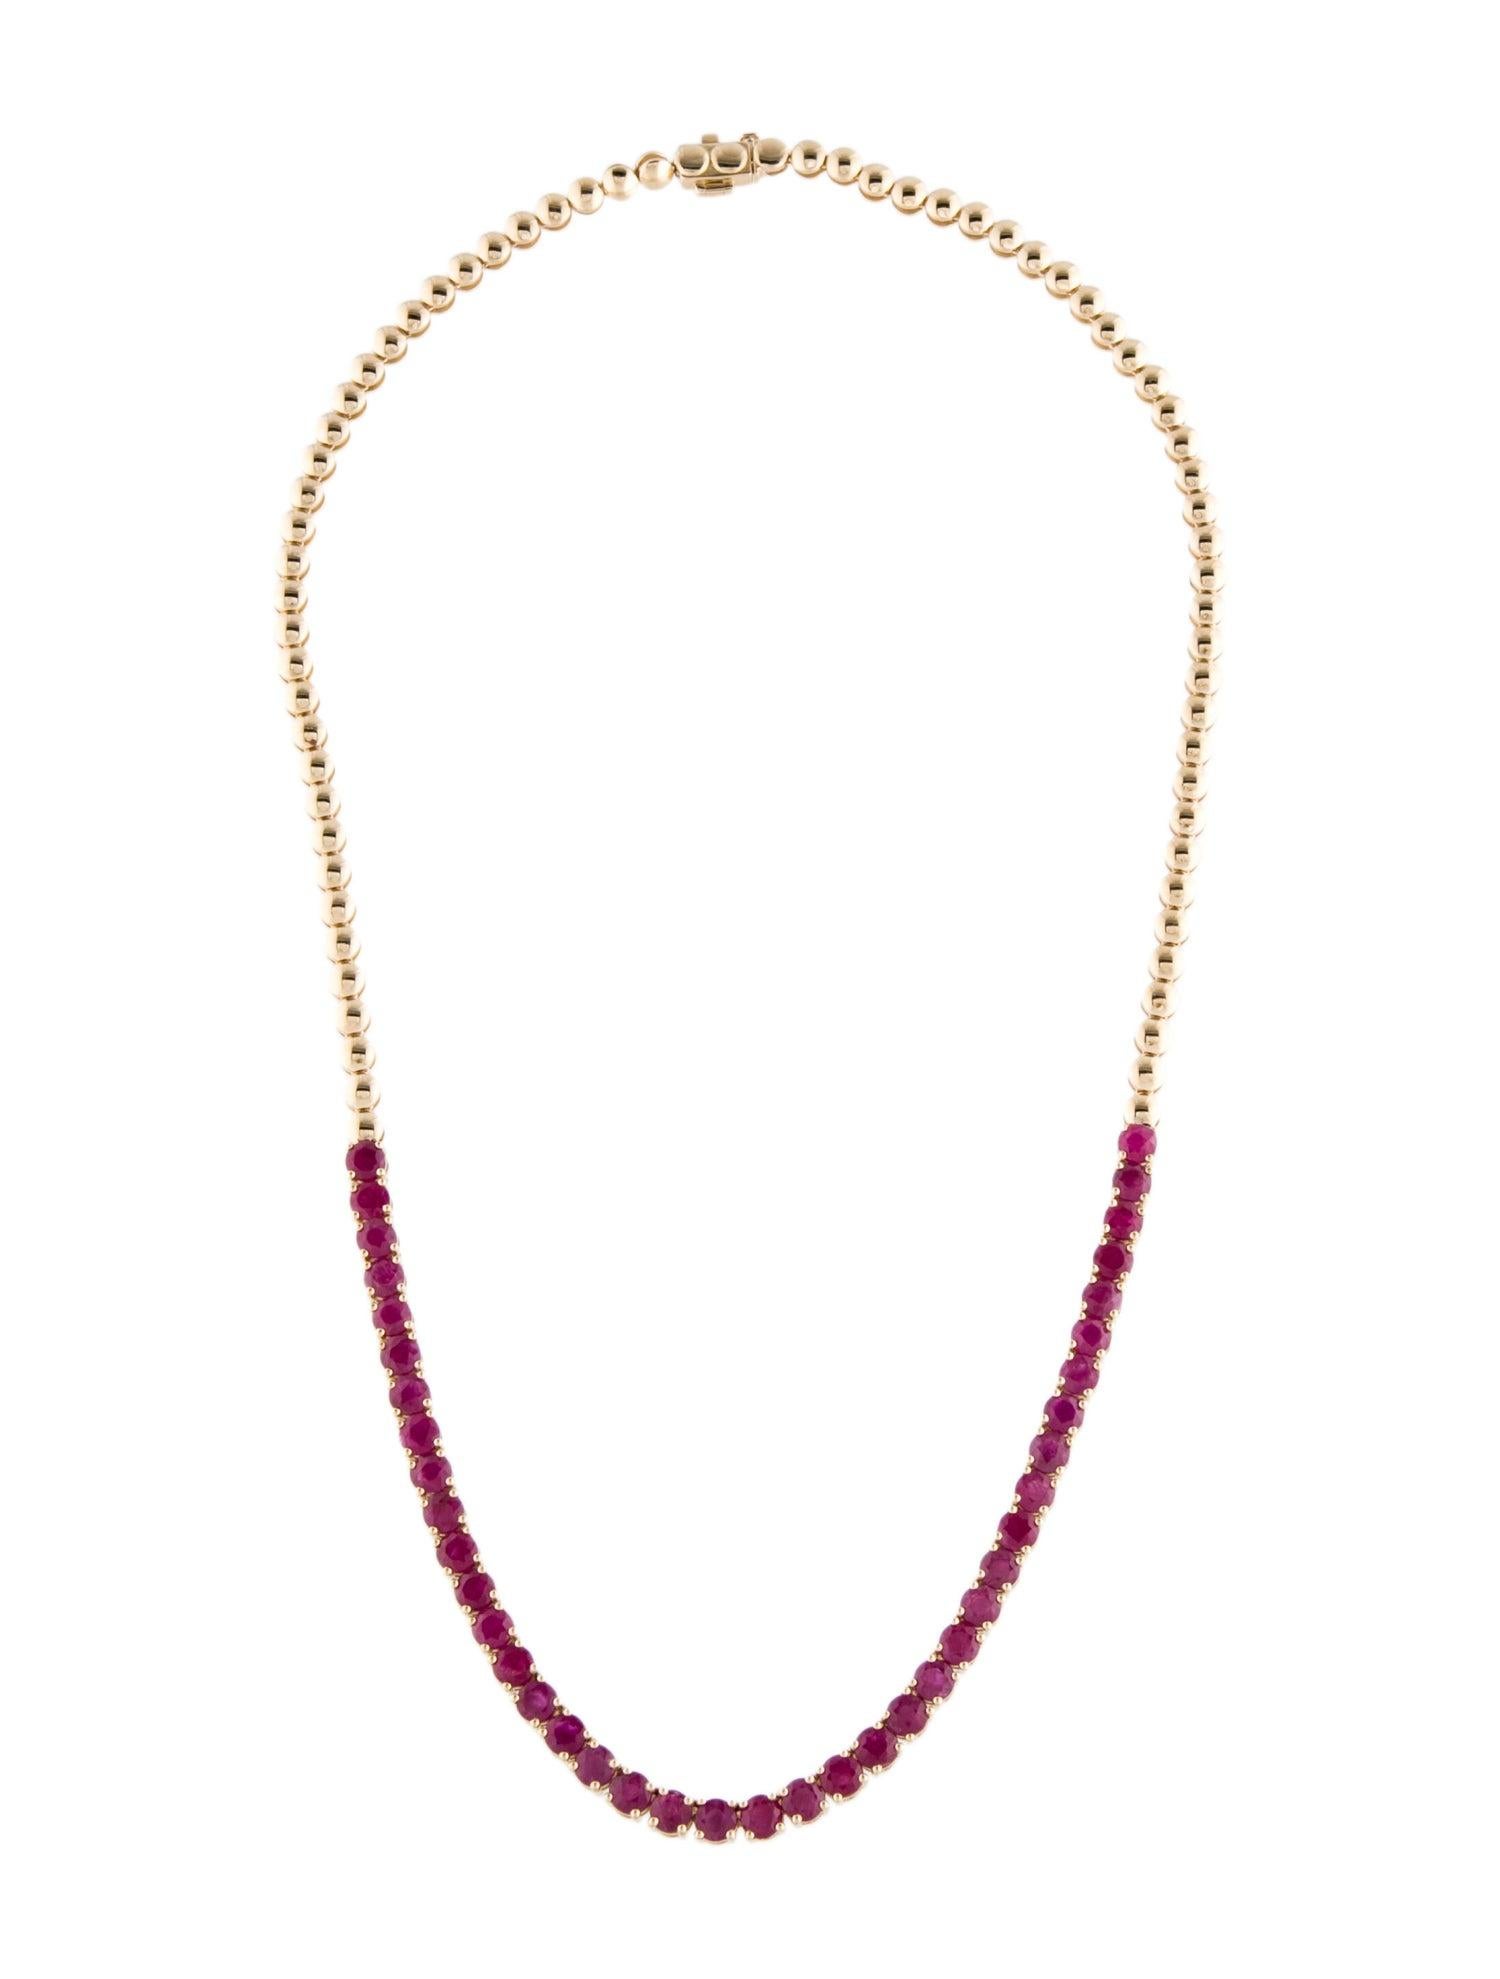 14K Ruby Chain Necklace 15.92ctw - Luxurious Jewelry Piece for Timeless Elegance In New Condition For Sale In Holtsville, NY